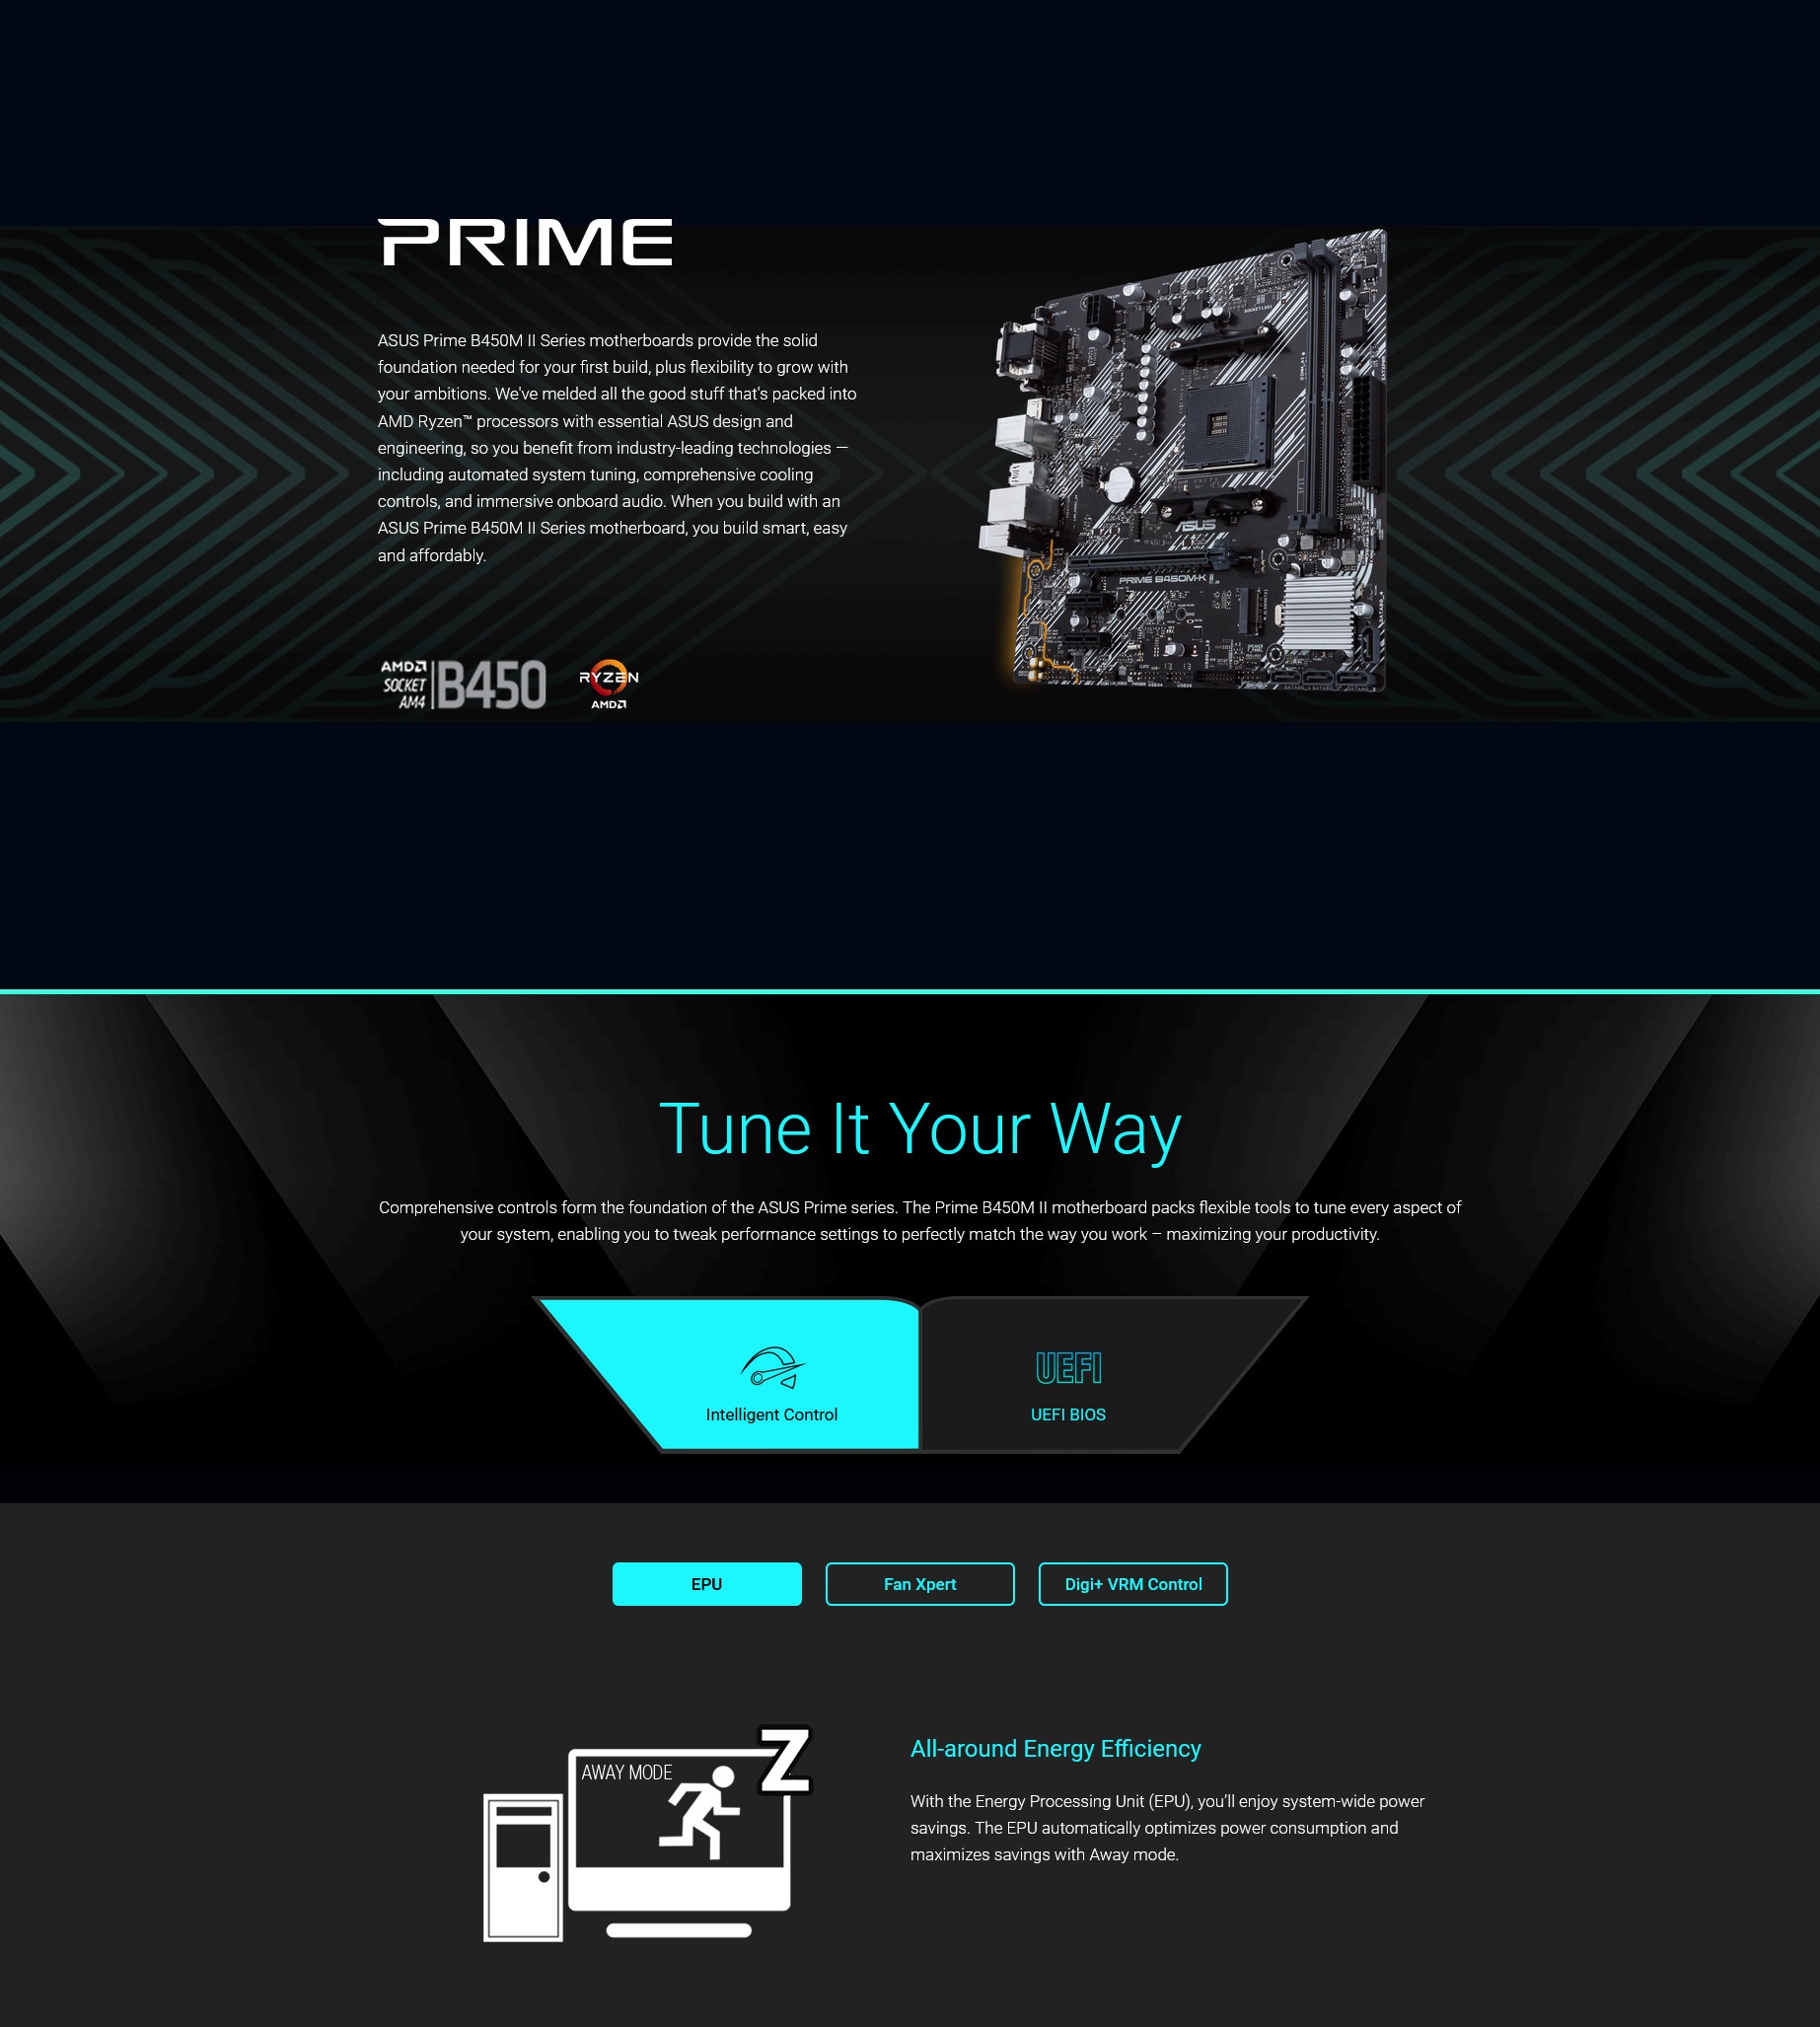 A large marketing image providing additional information about the product ASUS PRIME B450M-K II AM4 mATX Desktop Motherboard - Additional alt info not provided